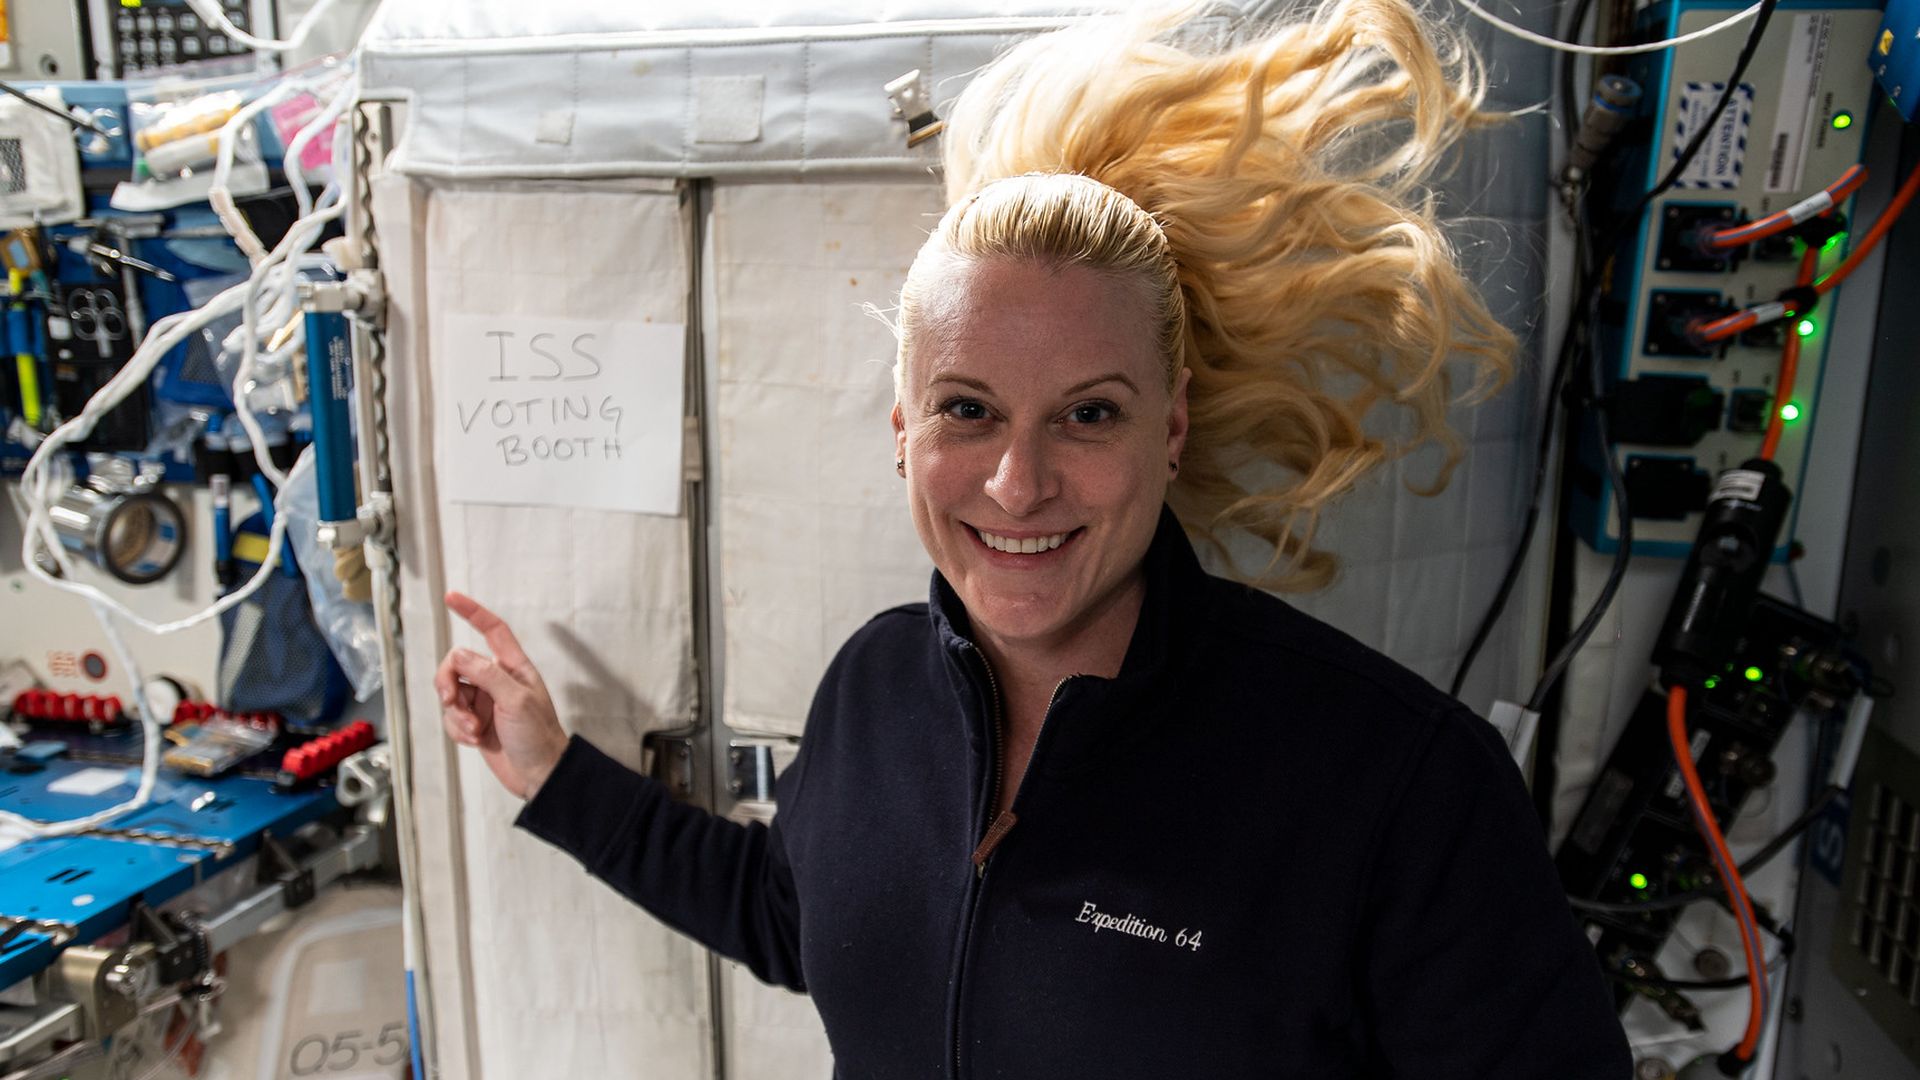 Astronaut Kate Rubins floats next to a door that says 